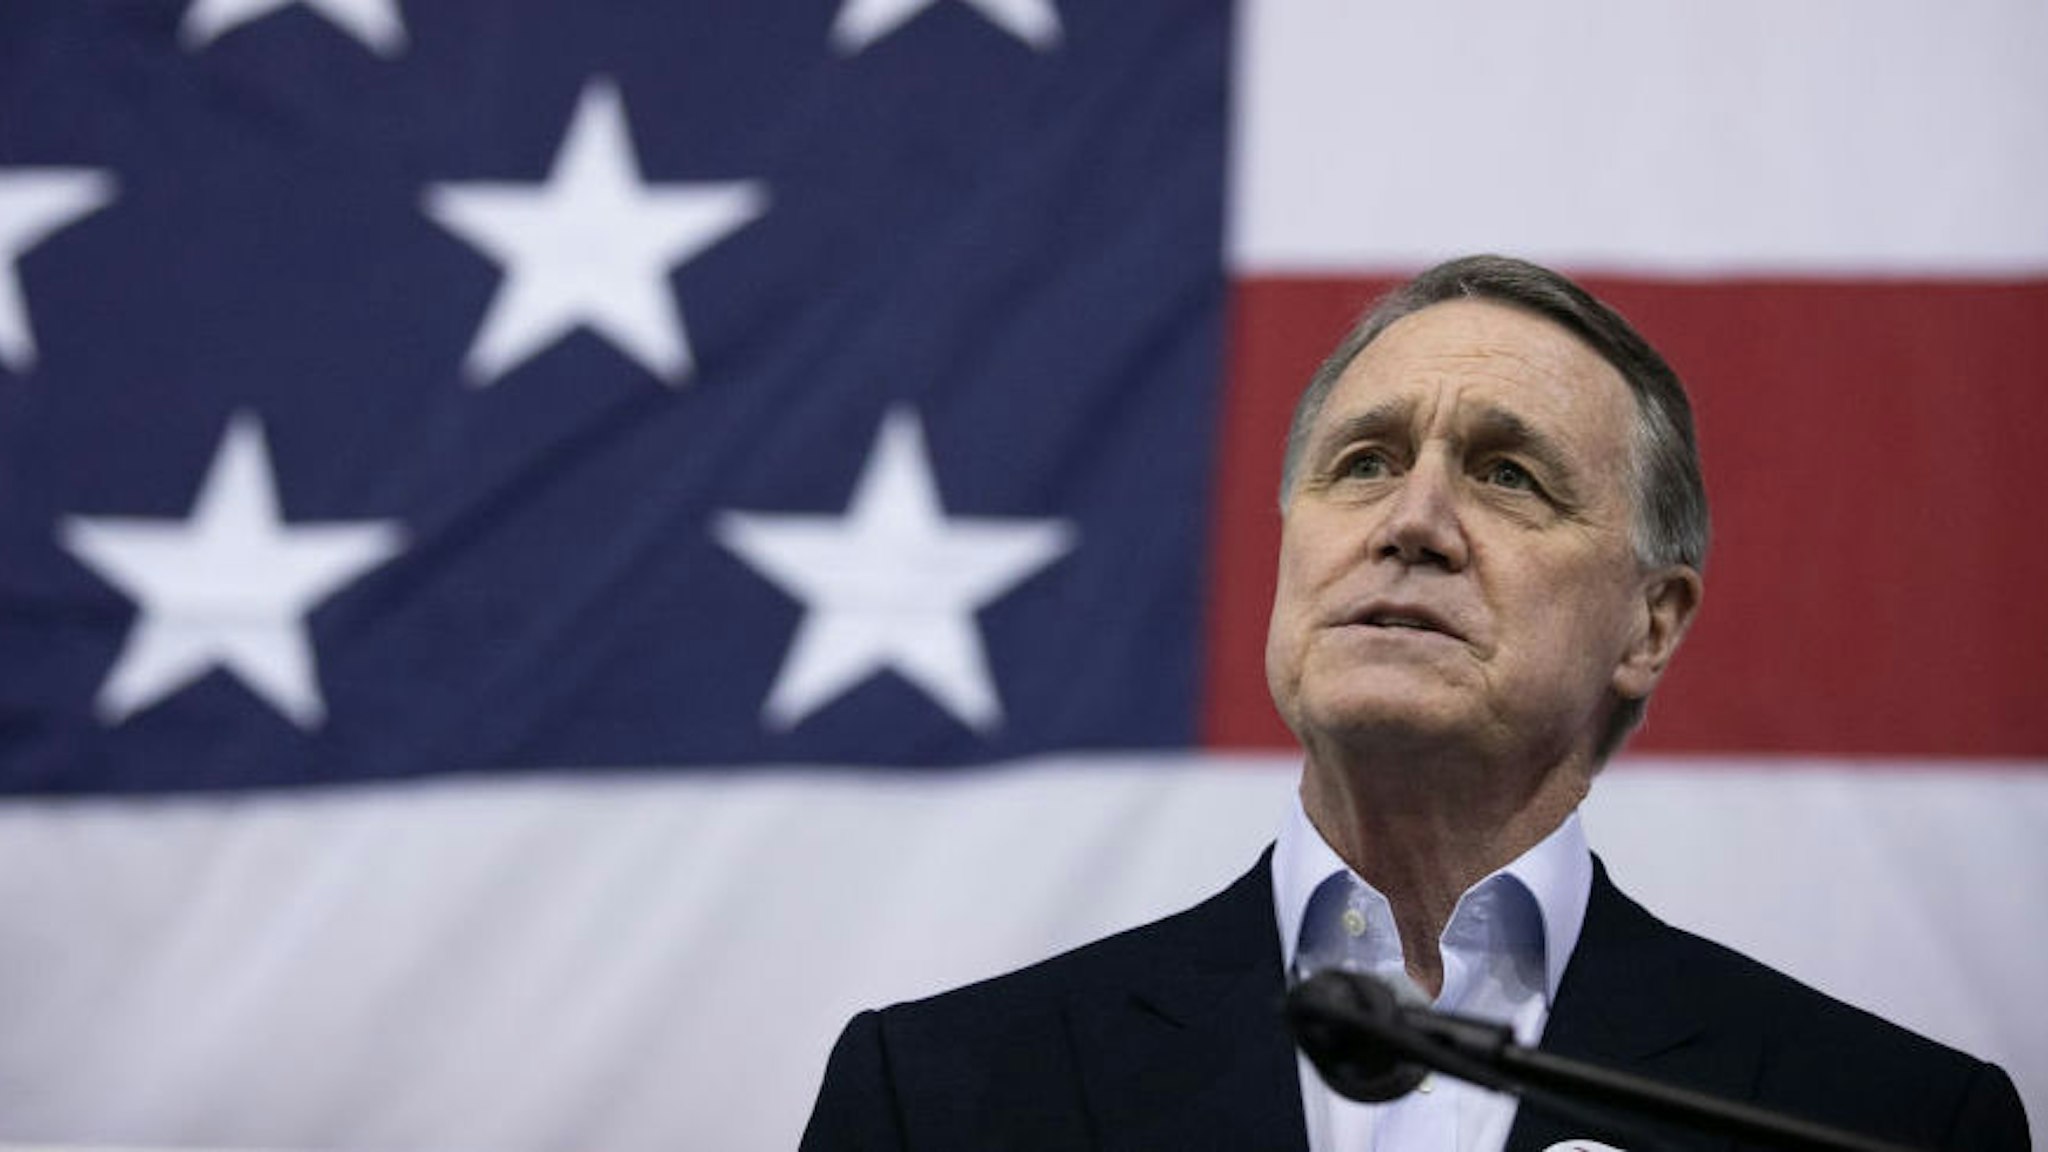 ATLANTA, GA - DECEMBER 14: Sen. David Perdue (R-GA) addresses the crowd during a campaign rally at Peachtree Dekalb Airport on December 14, 2020 in Atlanta, Georgia. As early voting begins, Perdue is facing Democratic candidate Jon Ossoff in a runoff election. The results of two Georgia Senate races will determine the party that controls the majority in the U.S. Senate.